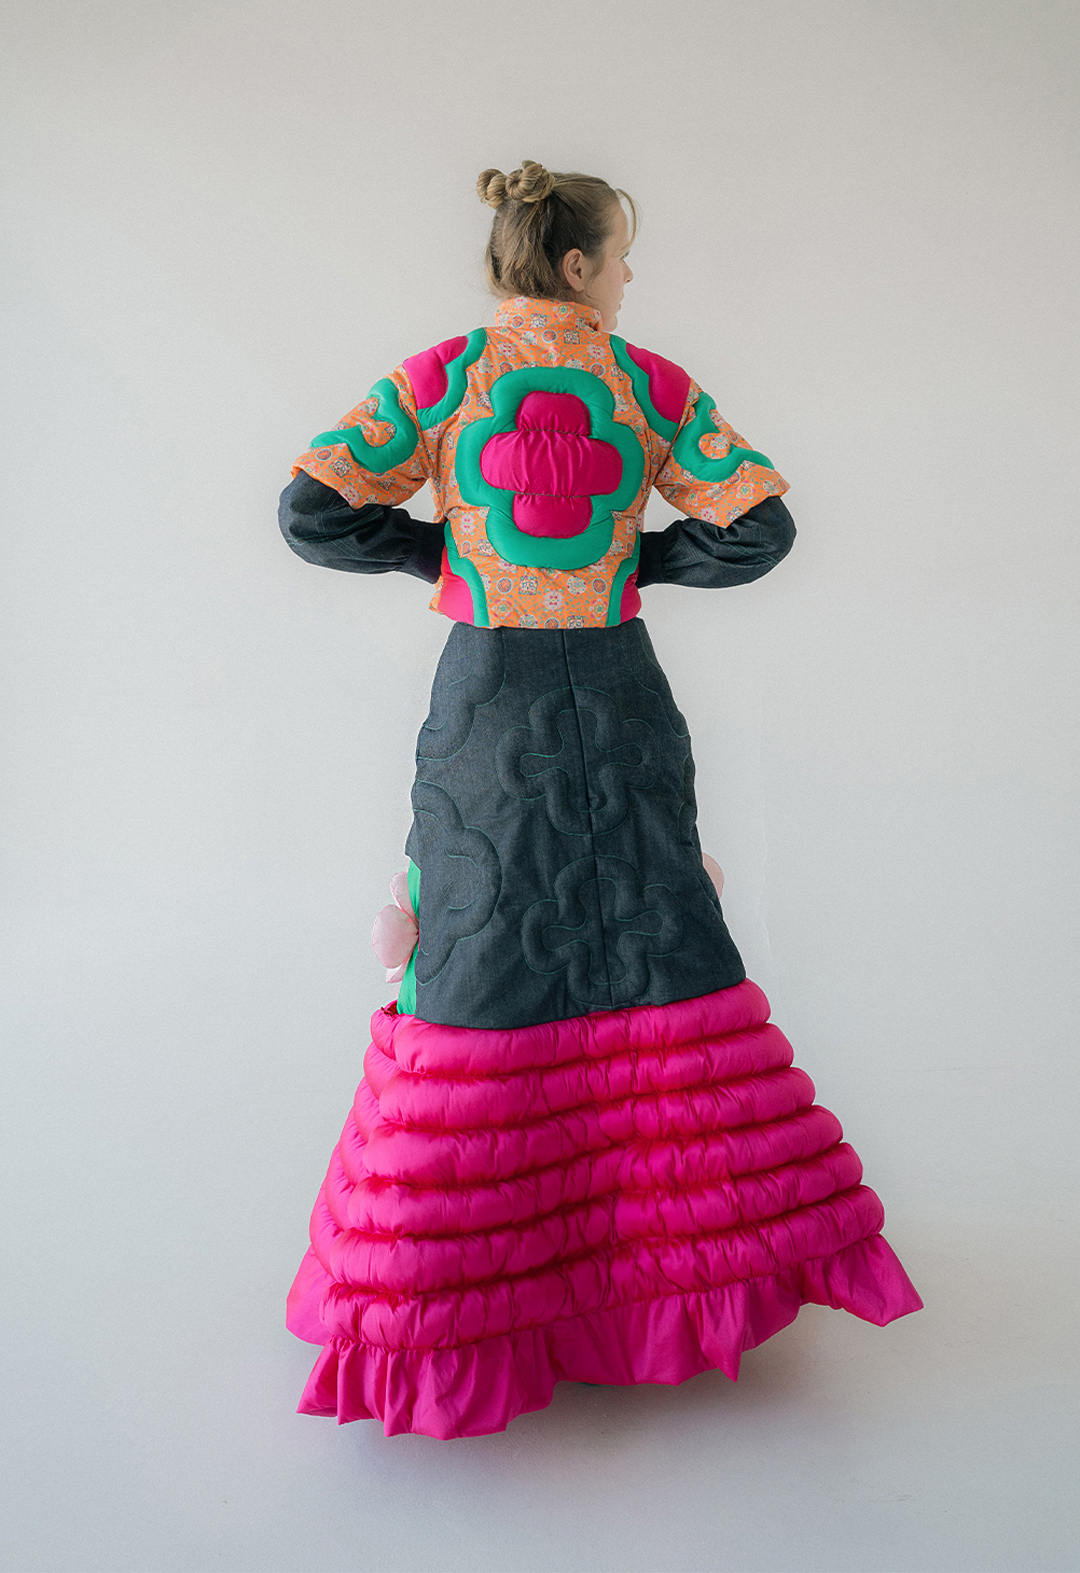 This image shows the back view of the short puffer jacket and flared skirt. The jacket is quilted in floral motifs that are reddish-pink and bluish-green color. The denim skirt is mixed and matched with taffeta fabric that was divided into six lines and filled with polyfill.